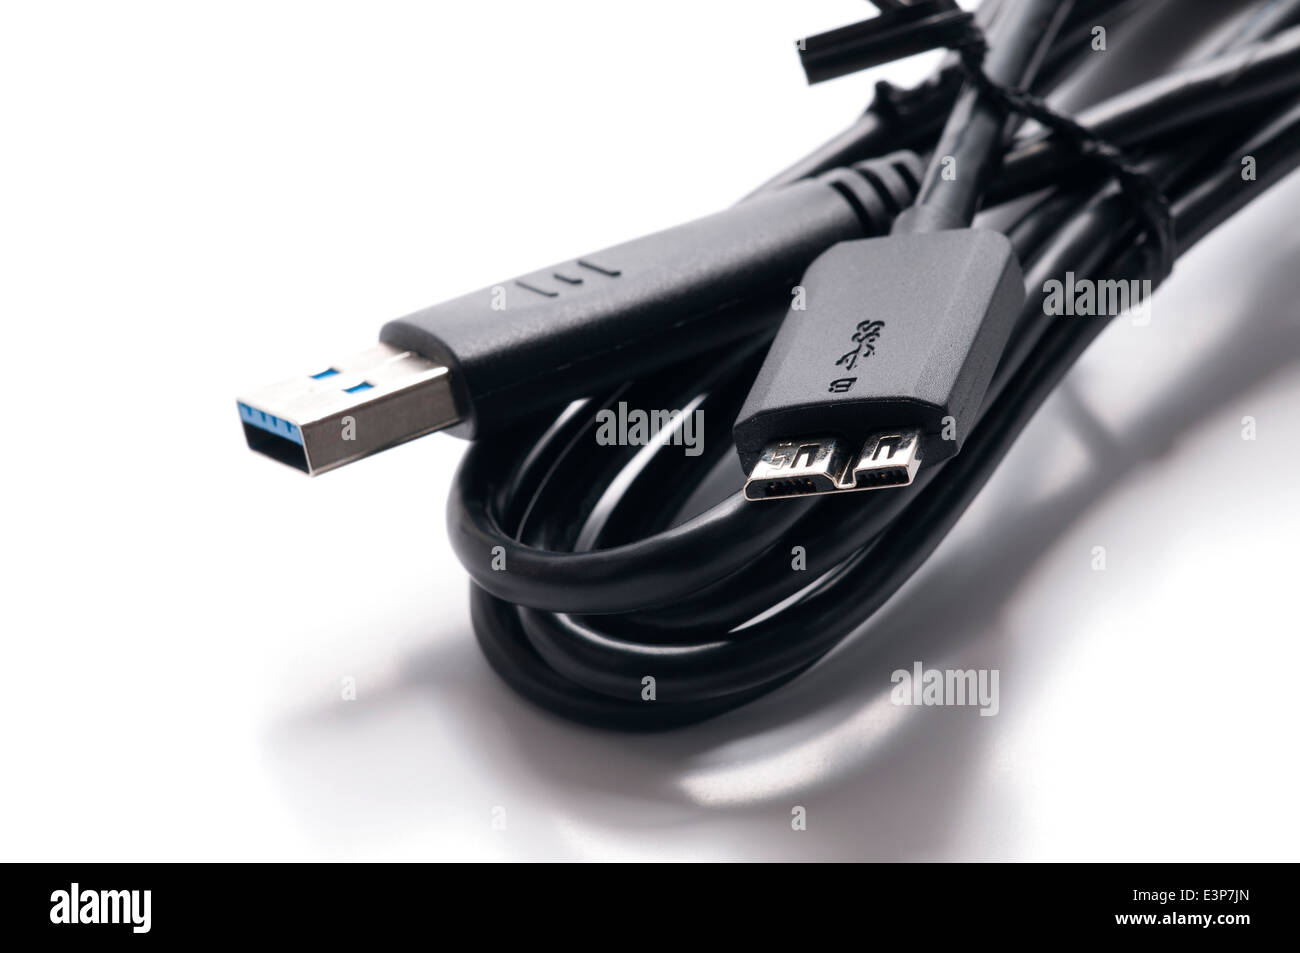 Universal Serial Bus (USB) standard for computer connectivity on white background Stock Photo